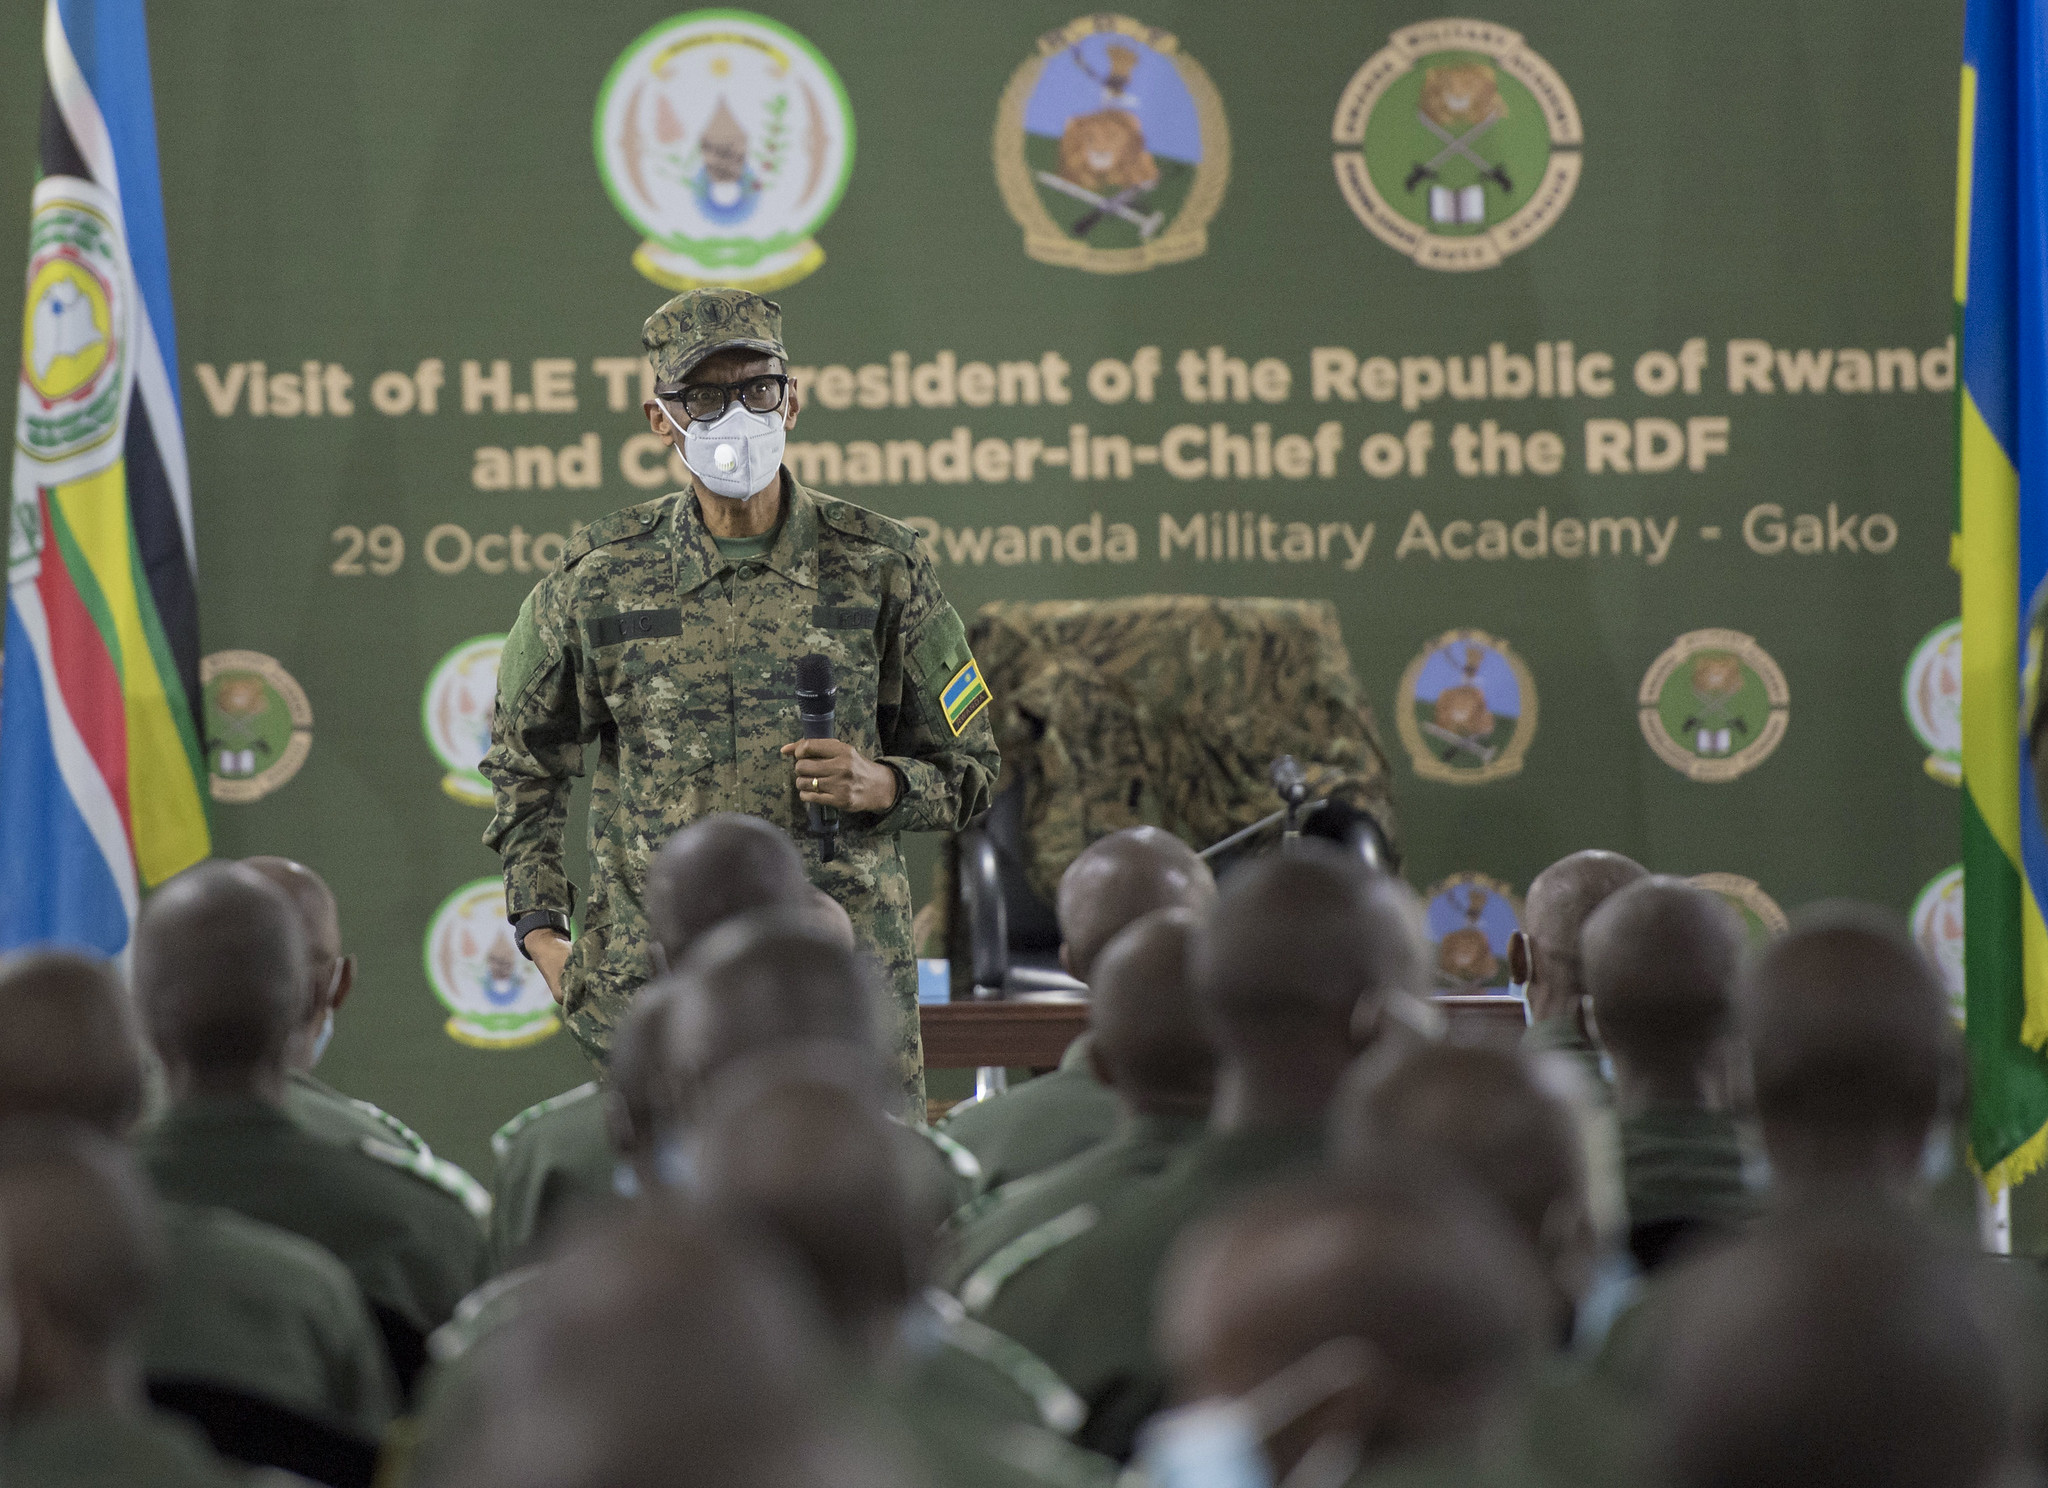 President Paul Kagame, who is also the Commander-in-Chief of Rwanda Defense Force (RDF), briefs Cadet Officers at the Rwanda Military Academy-Gako in Bugesera District, Eastern Province, on Thursday, October 29, 2020. / Photo: Village Urugwiro